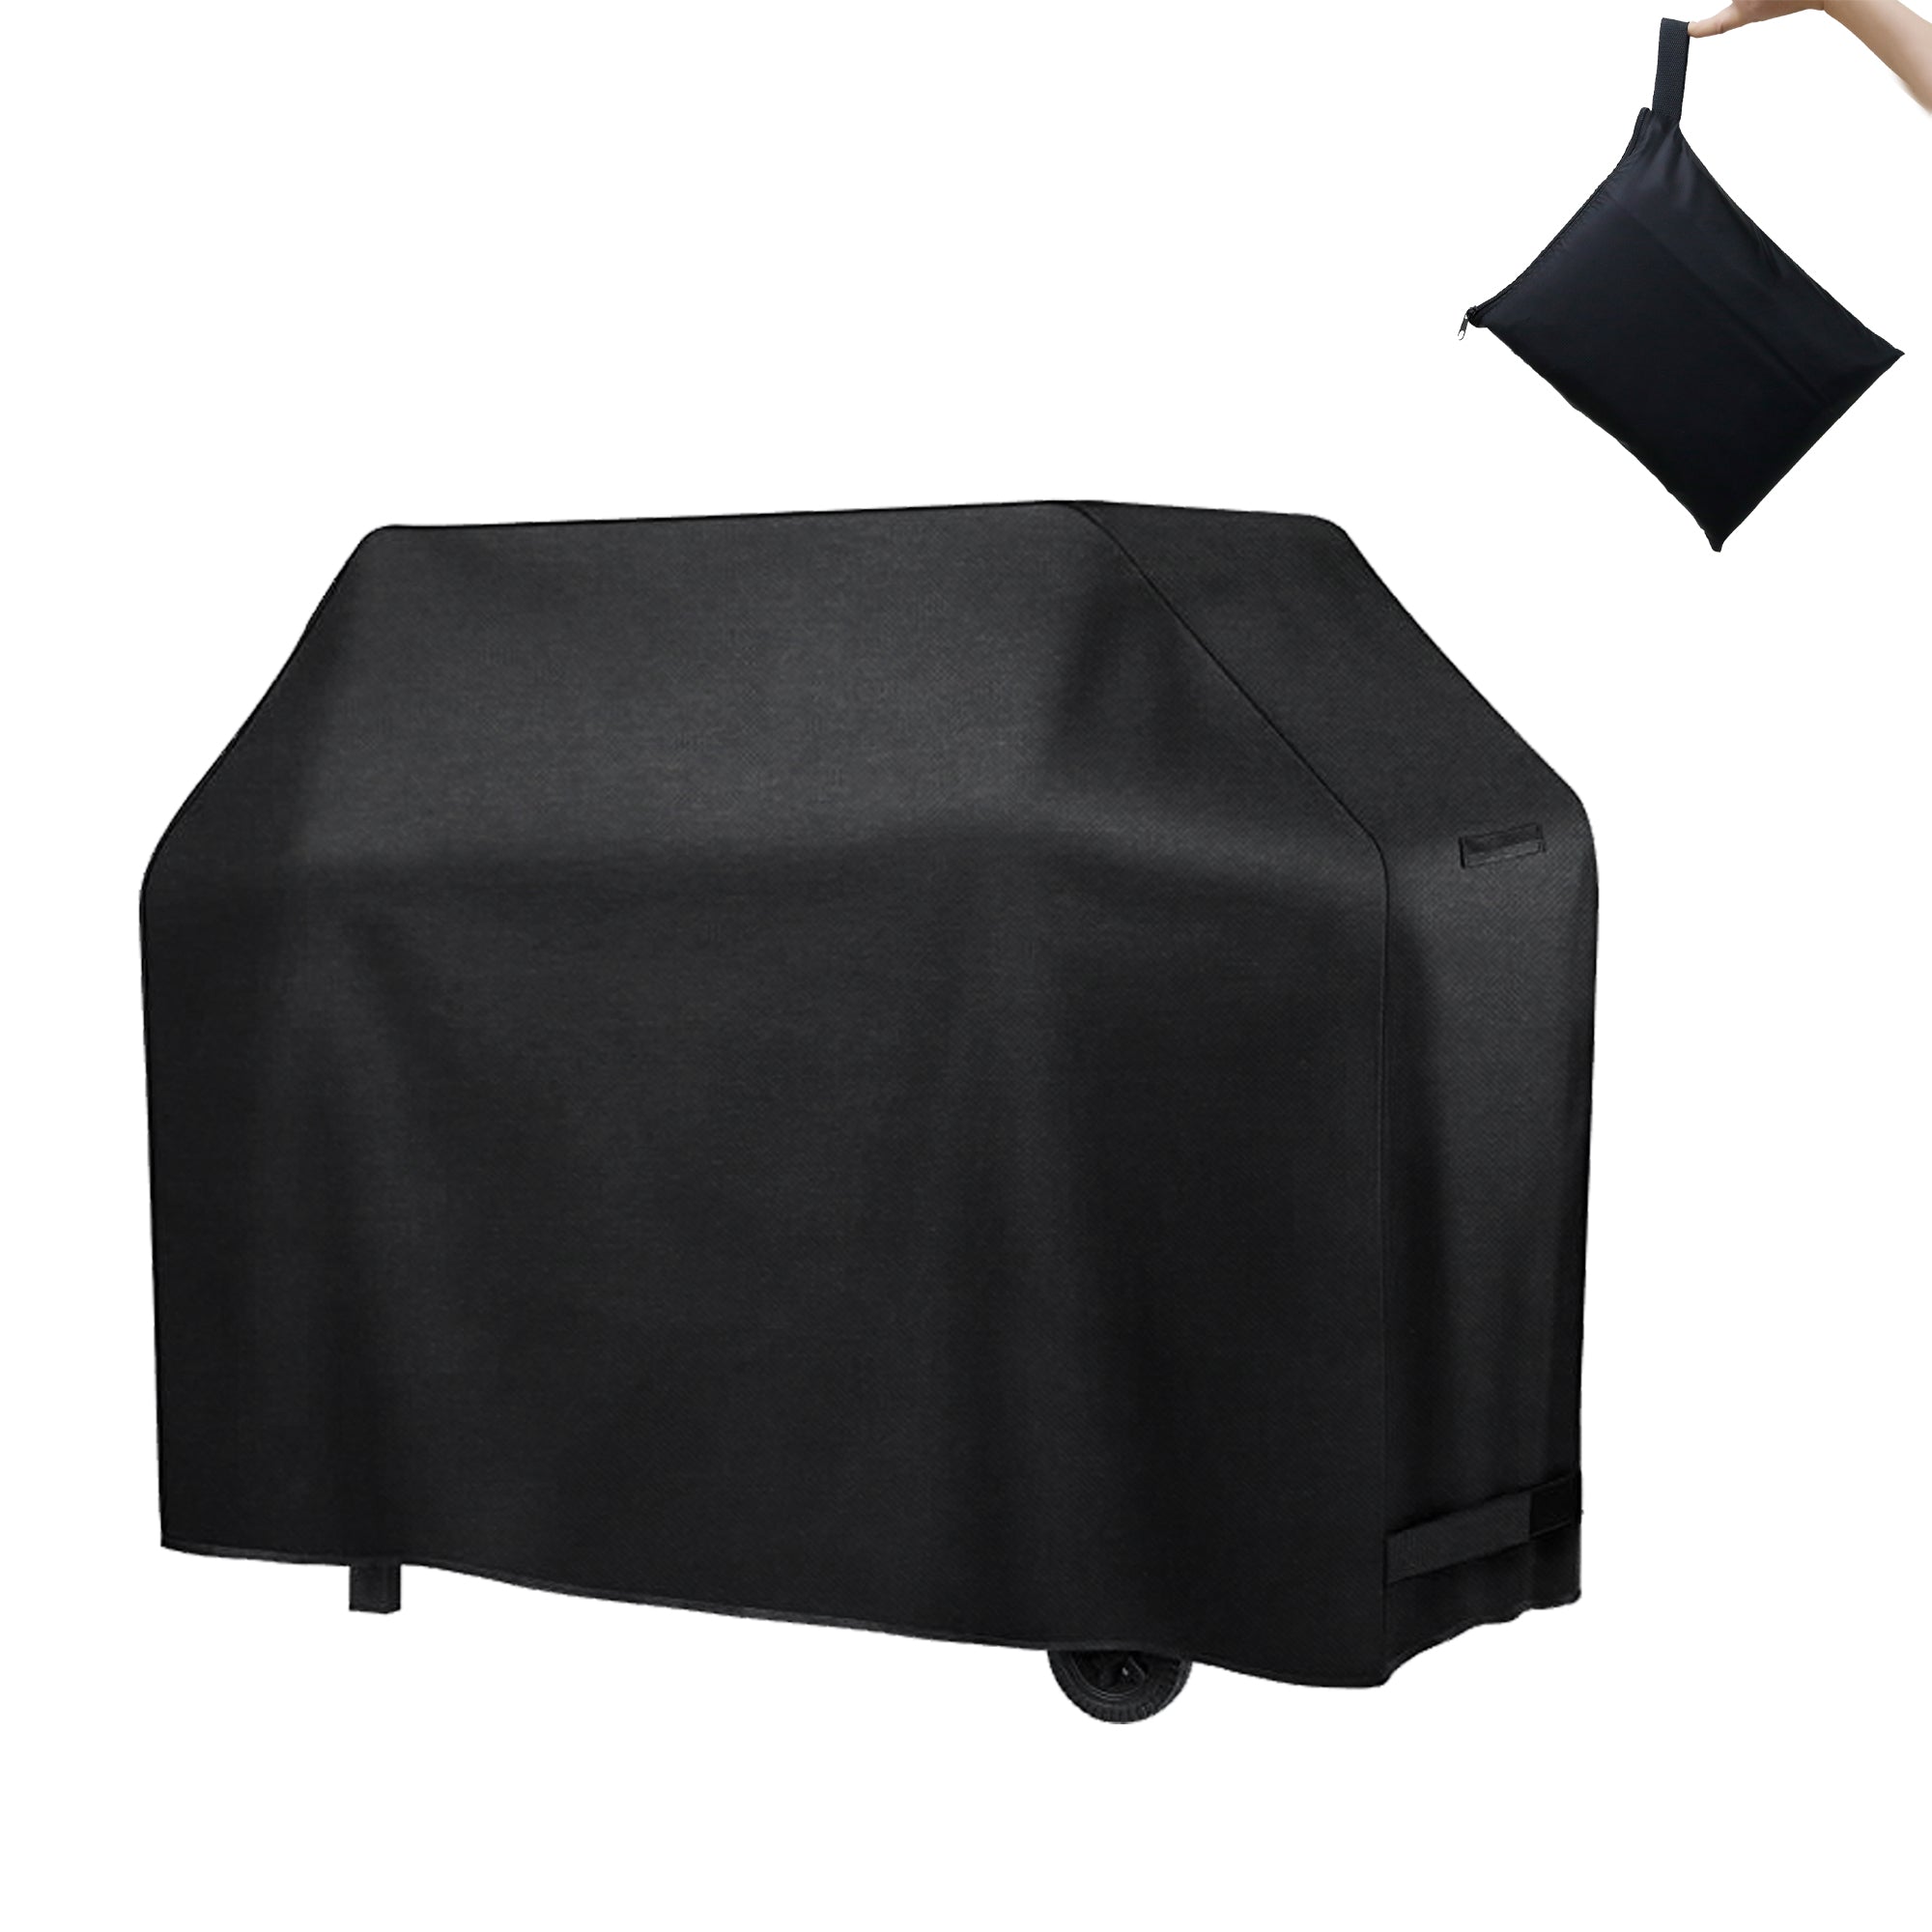 BBQ Cover Heavy Duty Waterproof Outdoor Barbecue Grill Cover Fade Rip Resistant 600D Oxford Fabric for Most Brands Of Grill